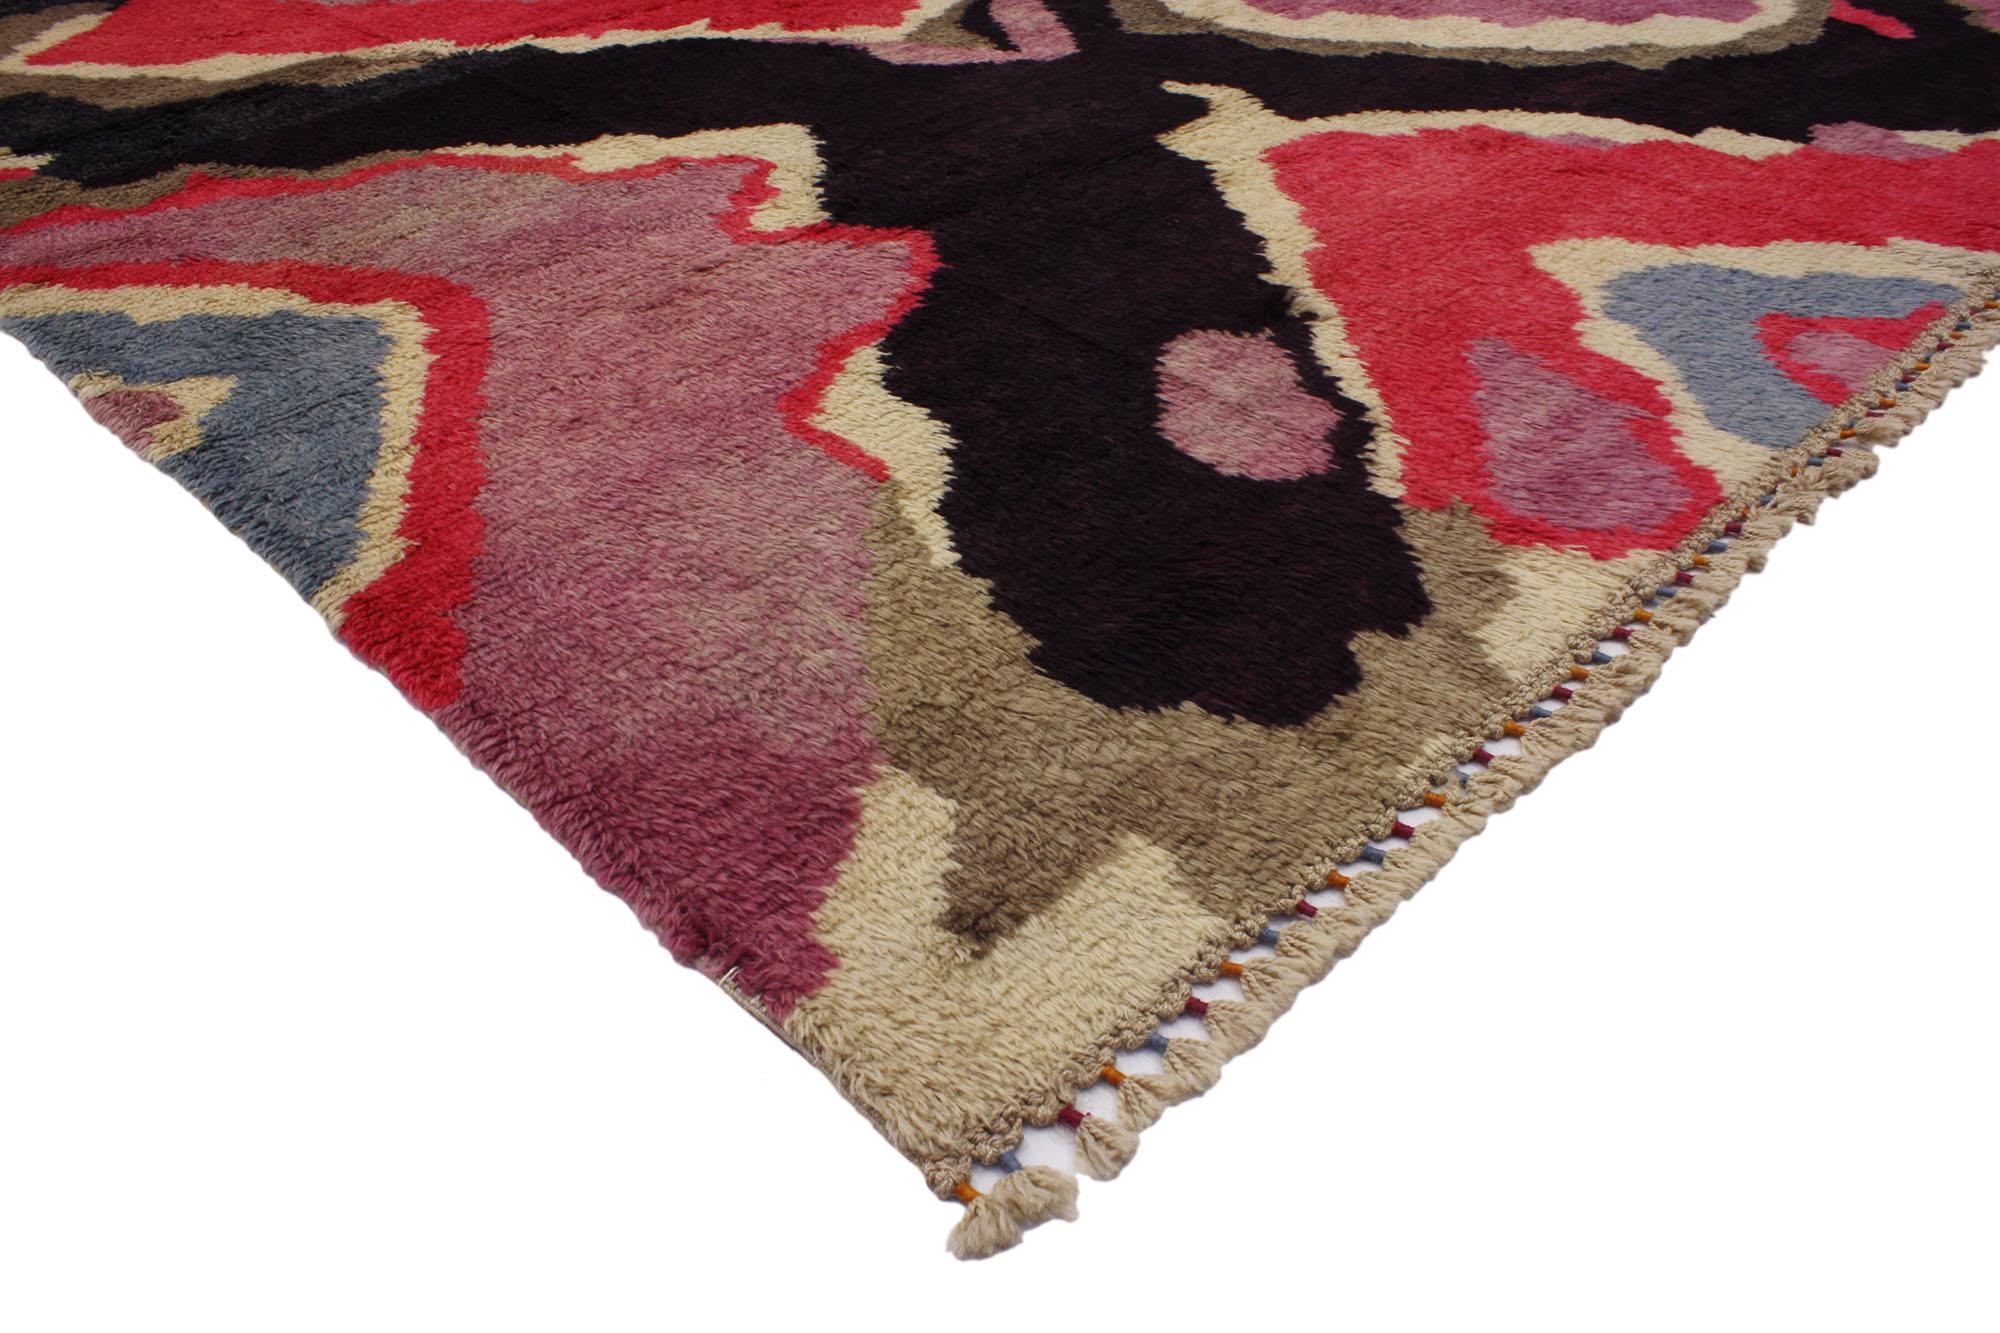 51866, new colorful contemporary Turkish Tulu shag area rug Inspired by Sonia Delaunay. This hand knotted wool contemporary Turkish Tulu shag area rug with Postmodern style showcases an all-over adventurous geometric pattern composed of ambiguous